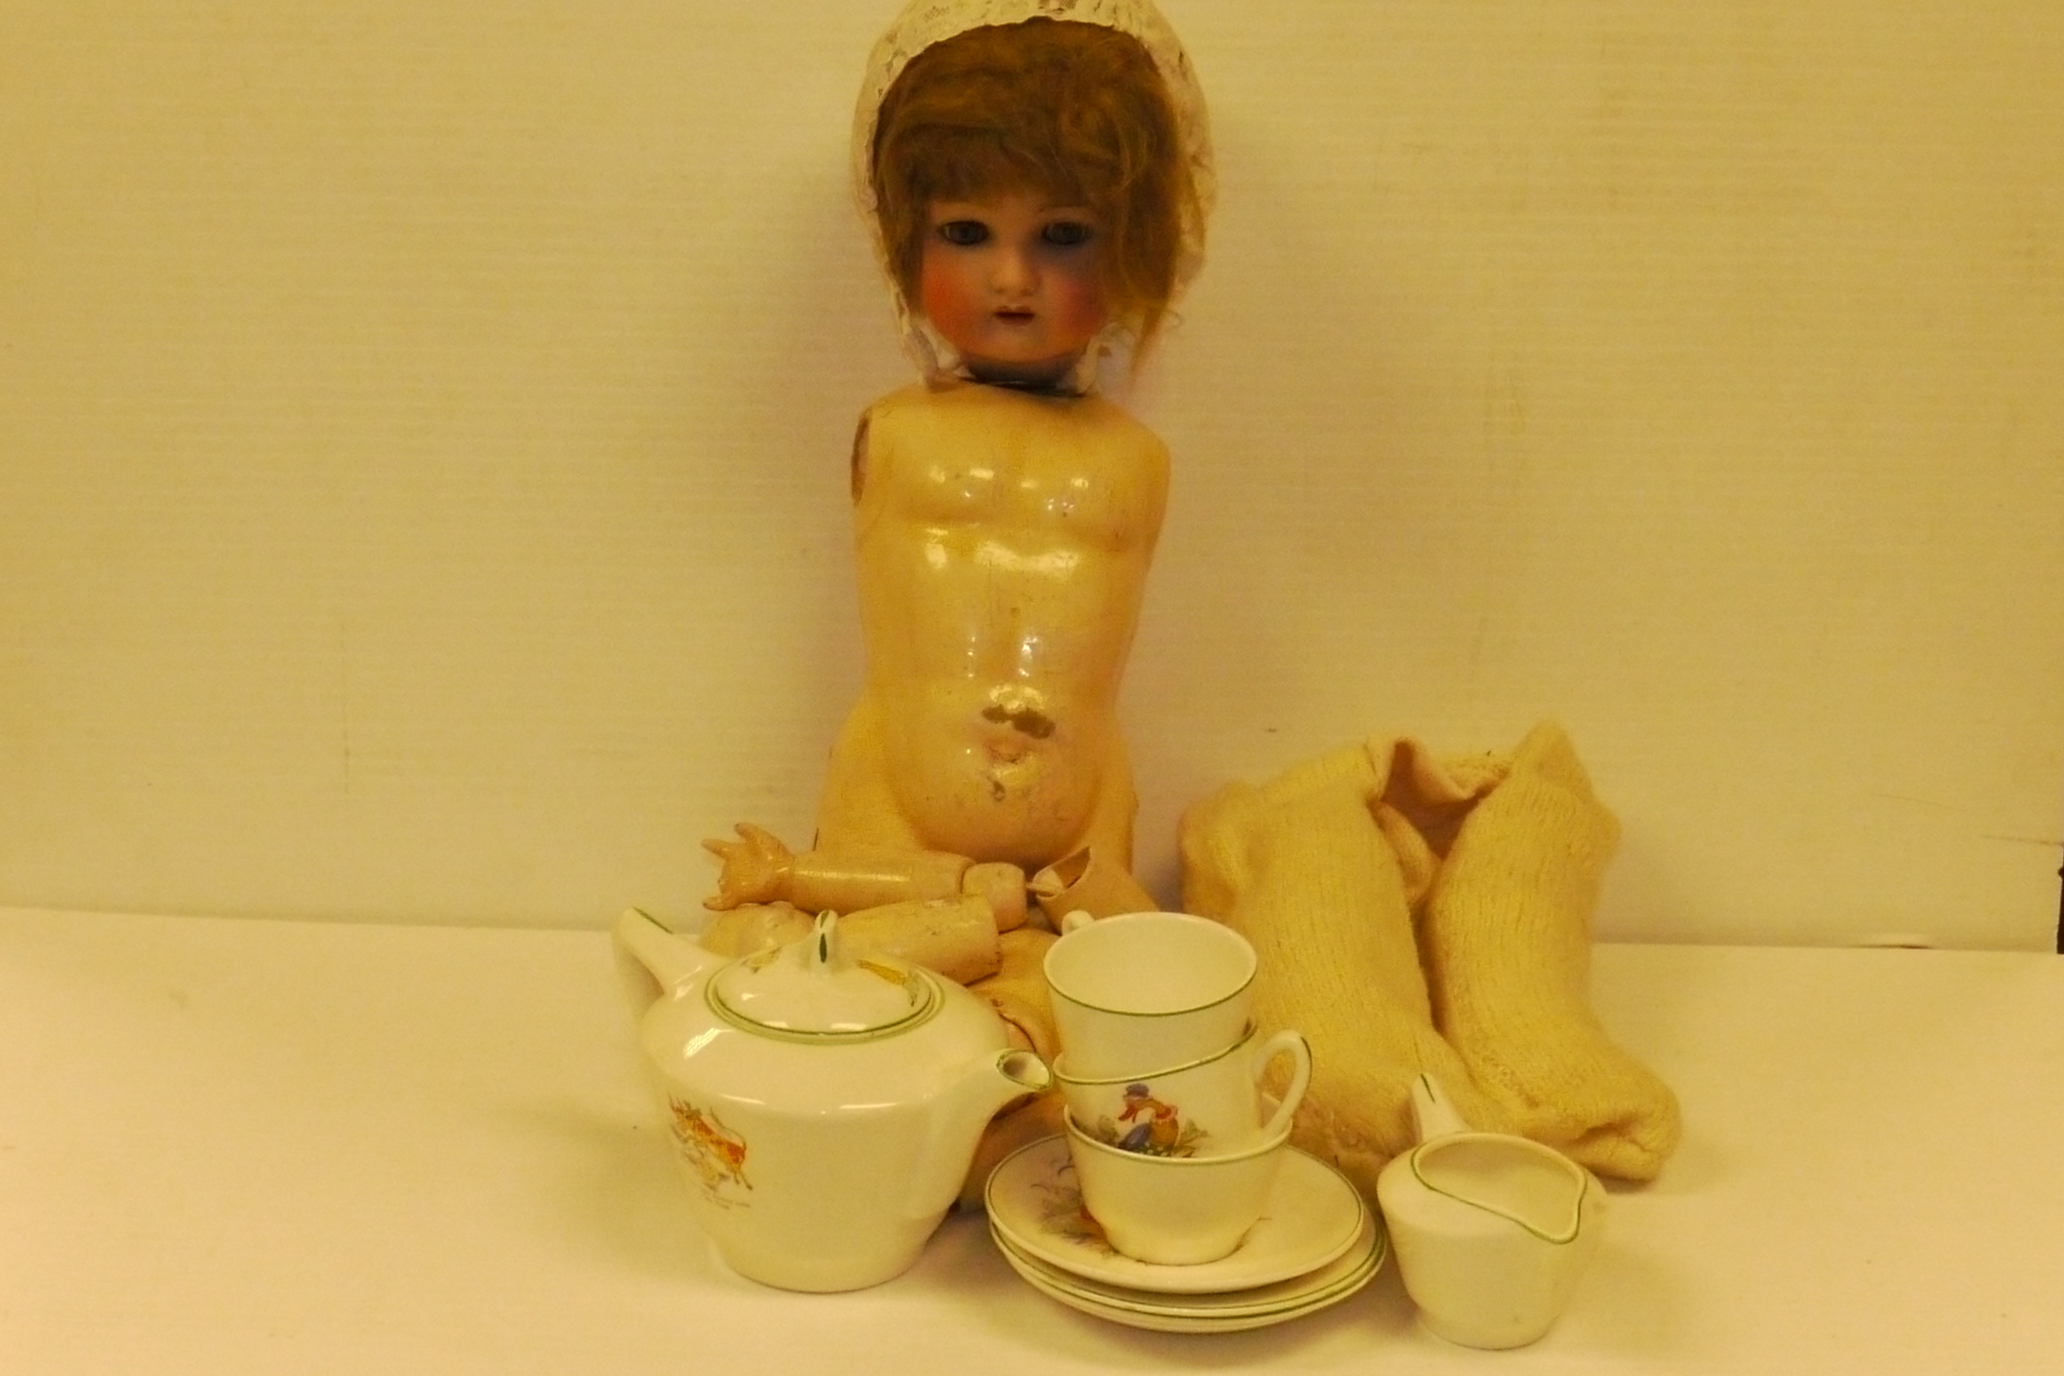 Ceramic Doll's Head, painted features, blue flirty eyes, dark blonde hair covered by a lace